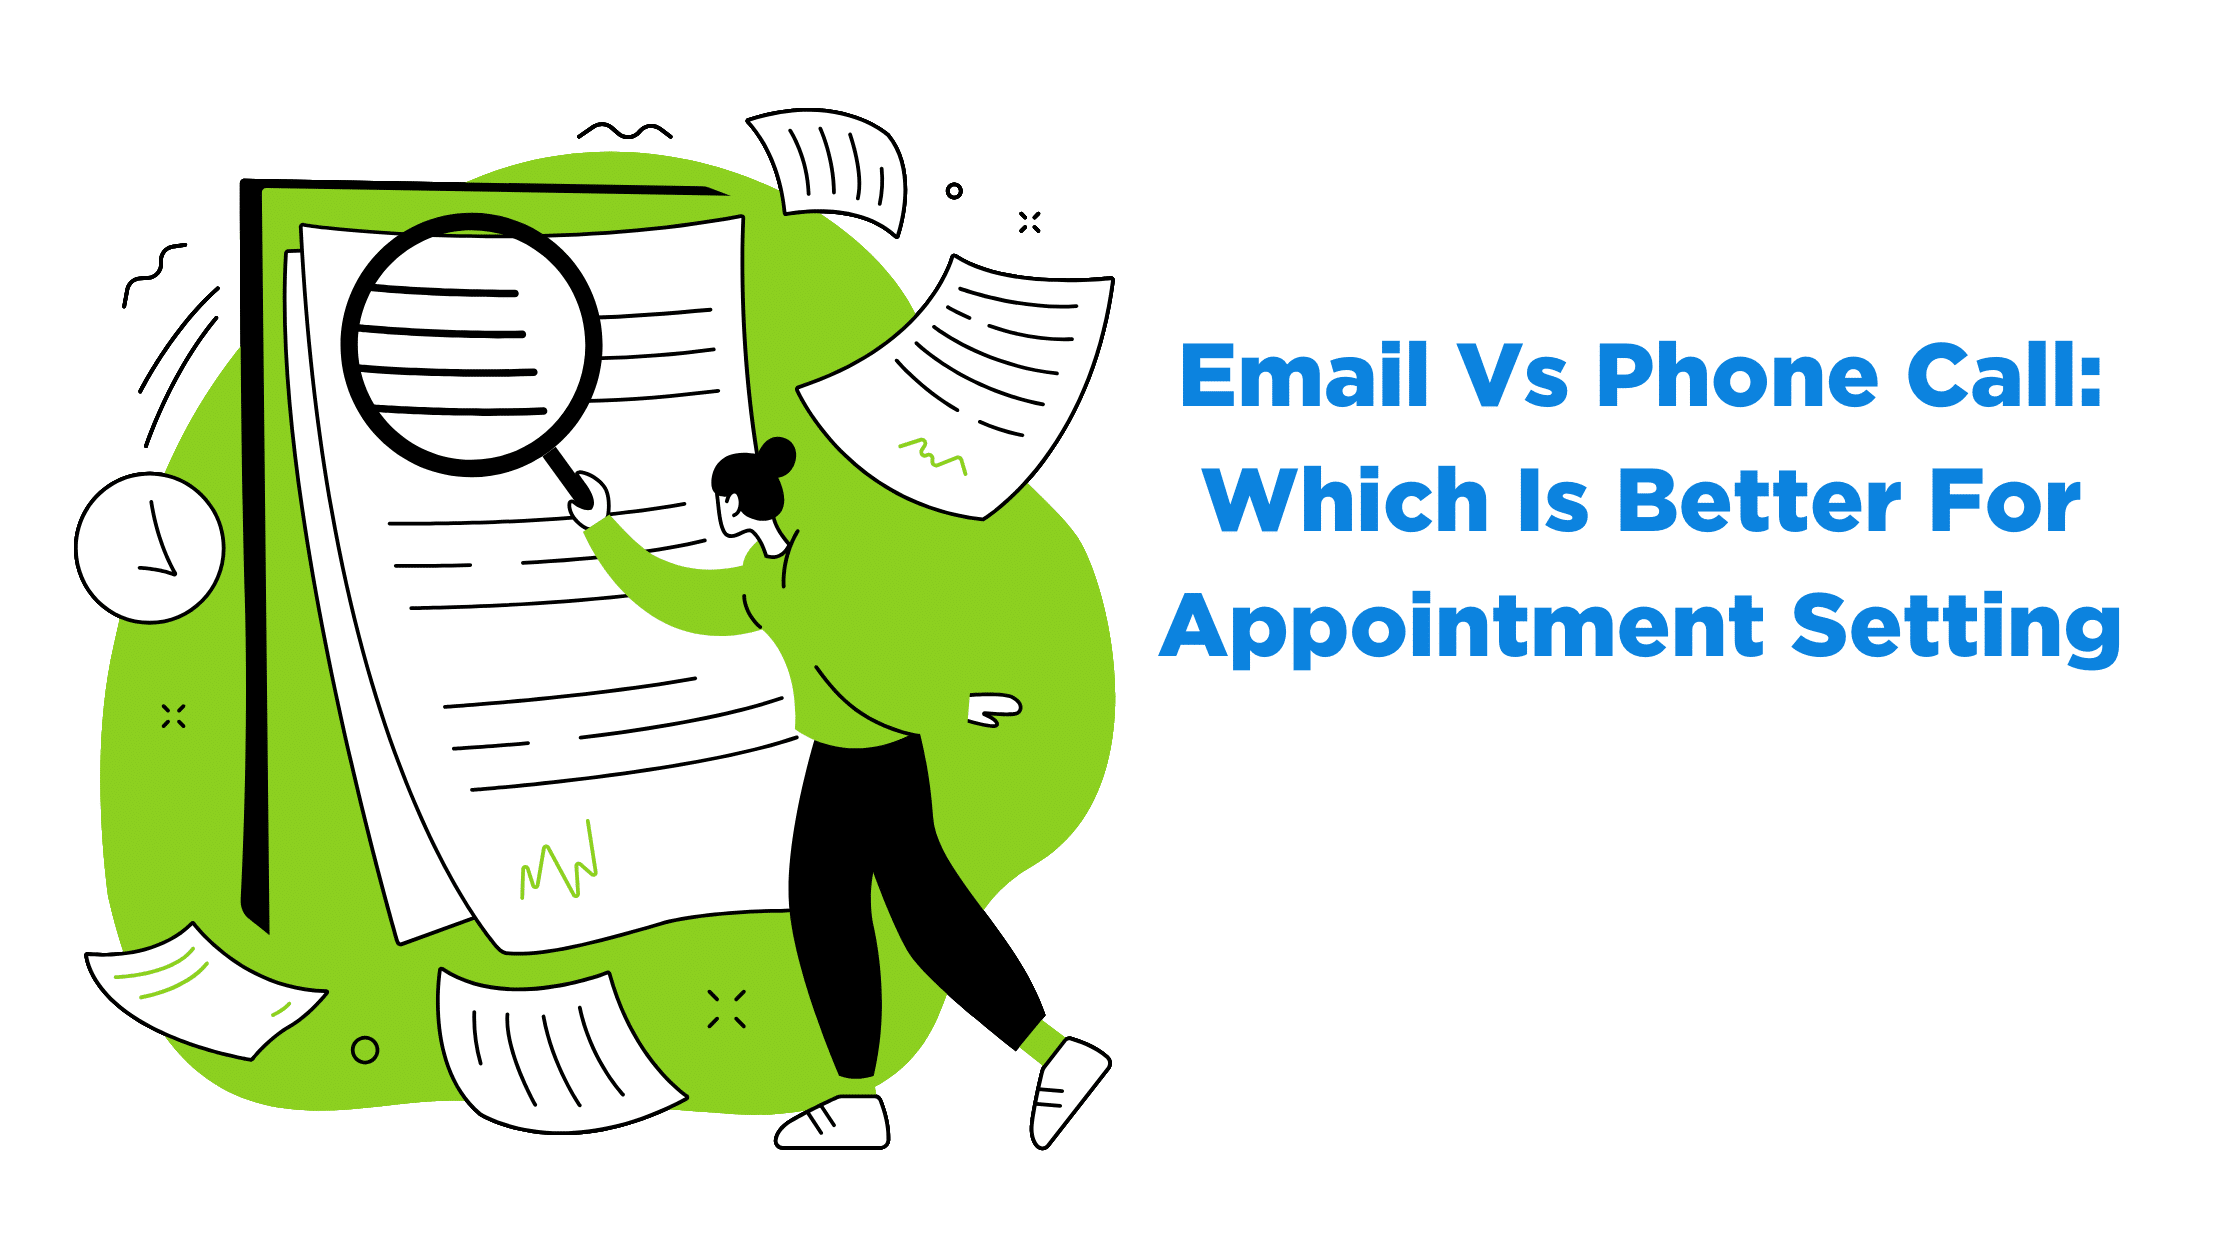 Email Vs Phone Call: Which Is Better For Appointment Setting